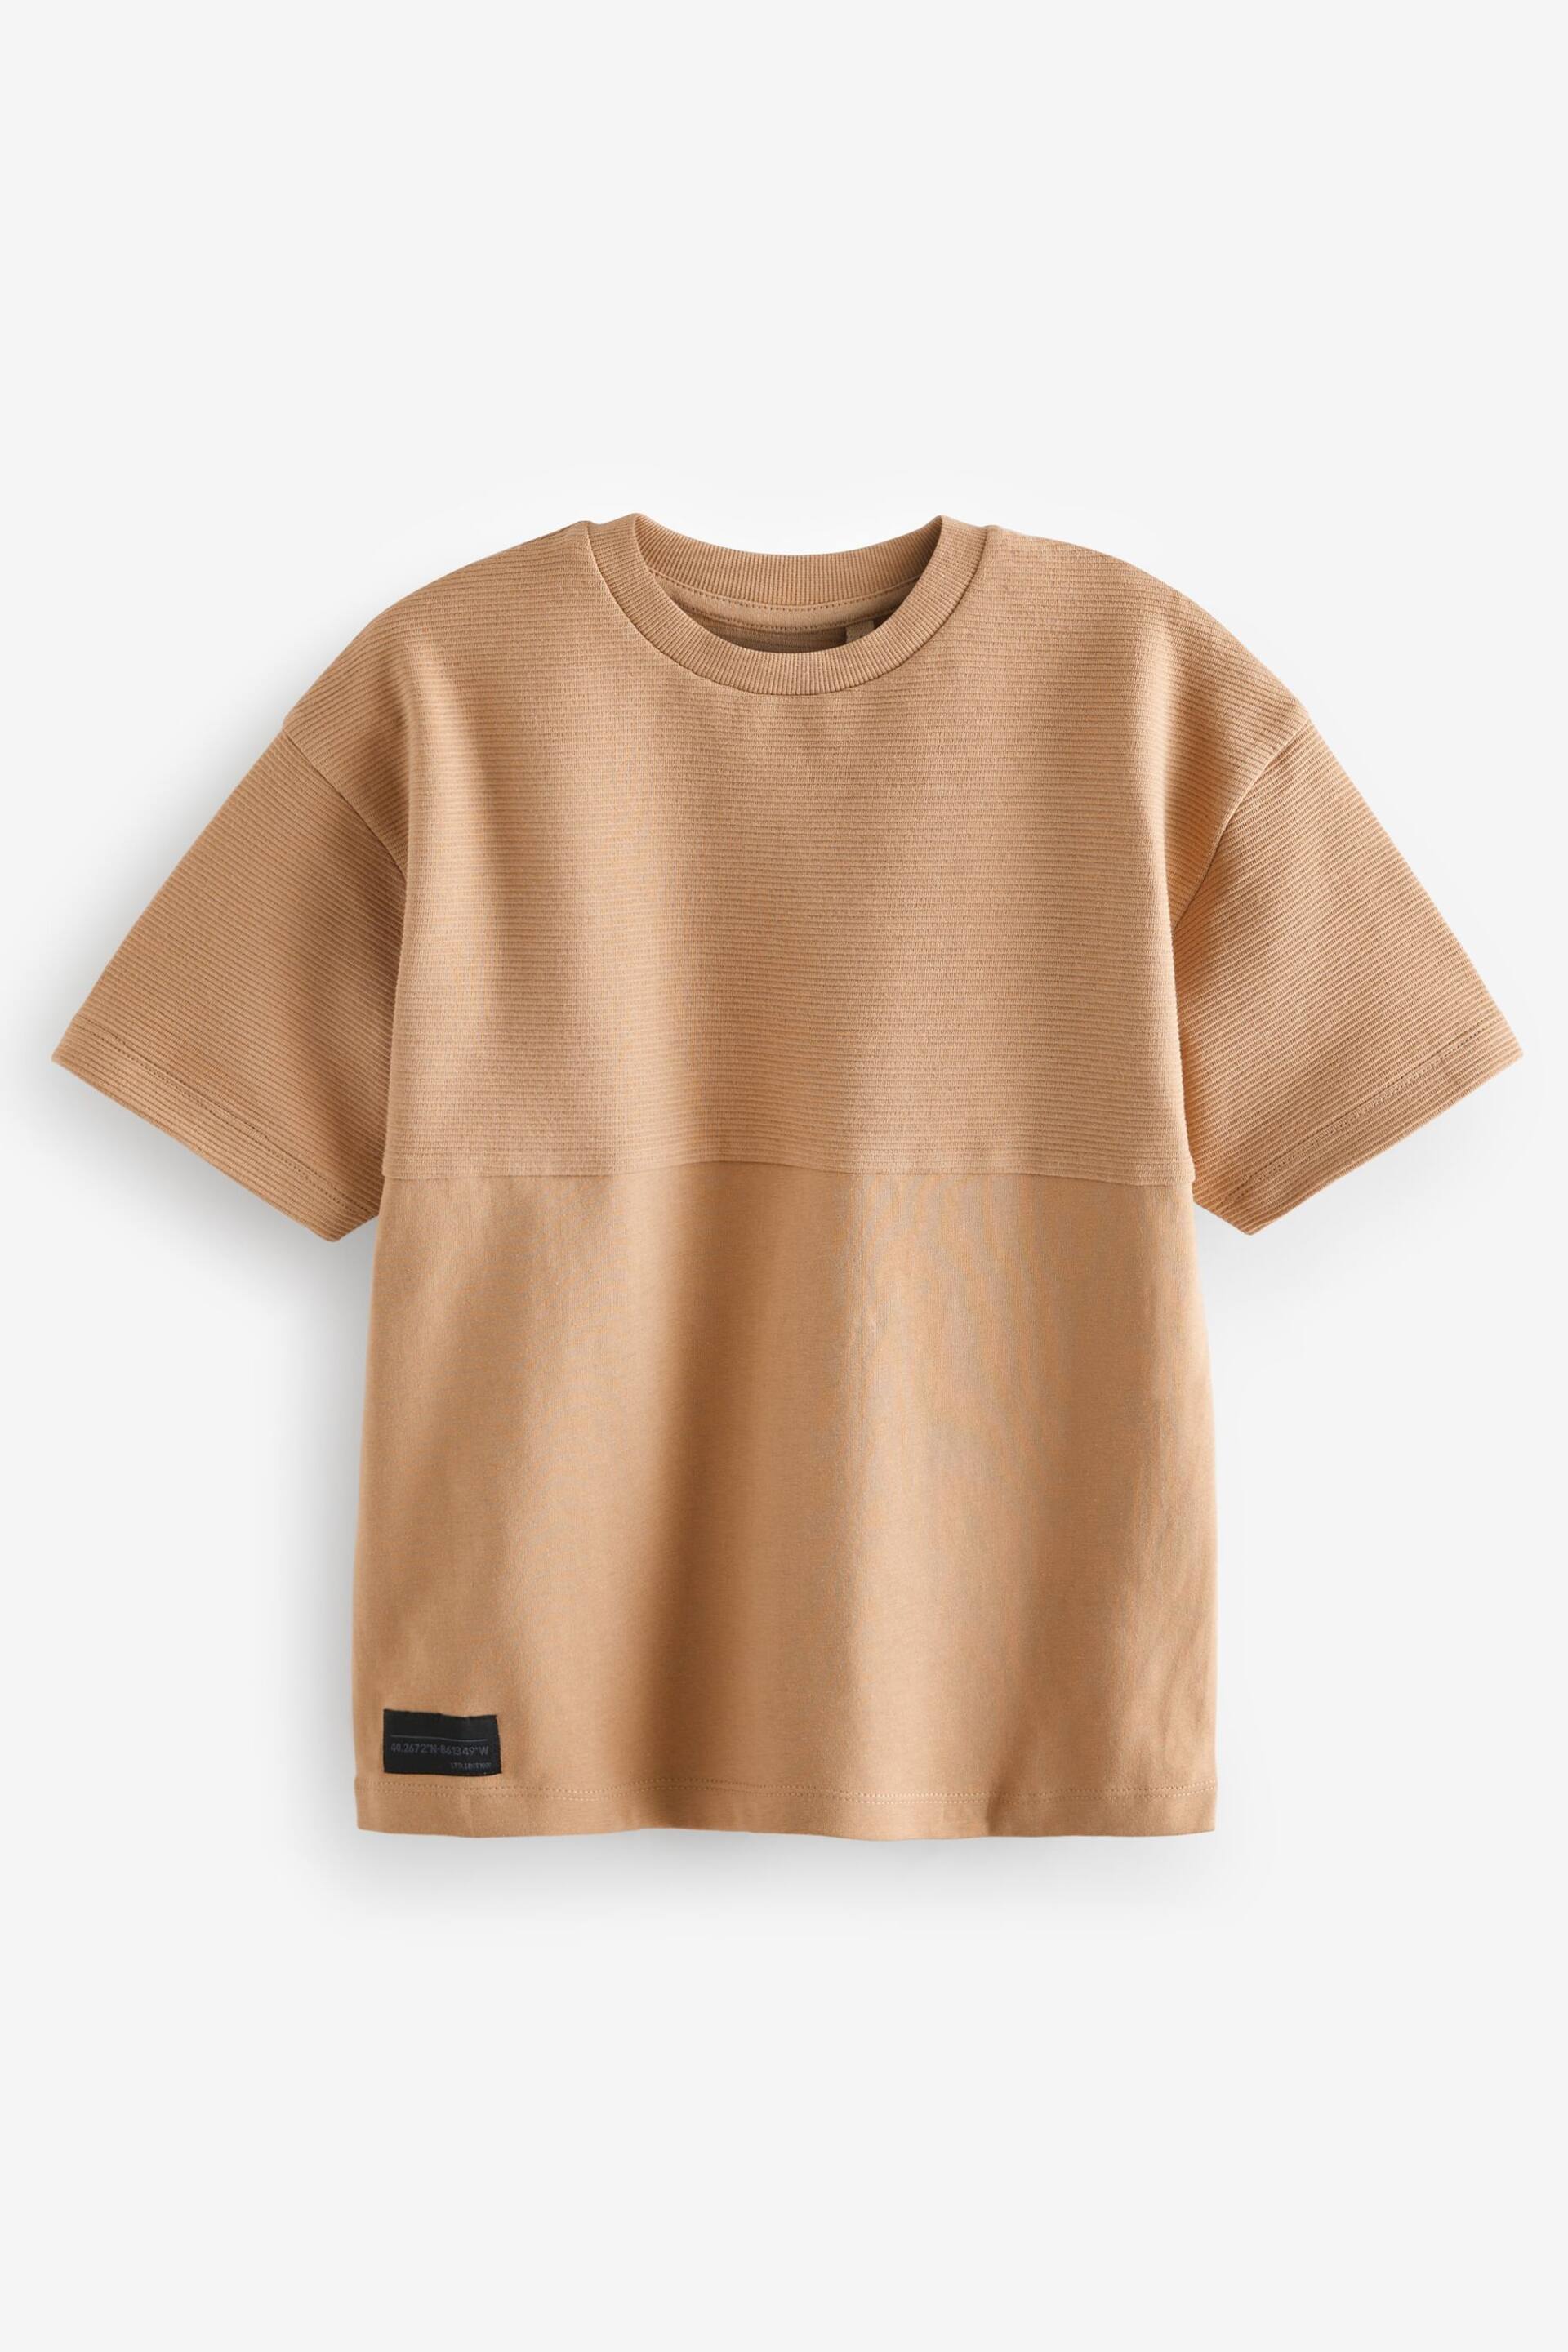 Blue/Tan Brown Oversized T-Shirts 3 Pack (3-16yrs) - Image 2 of 3